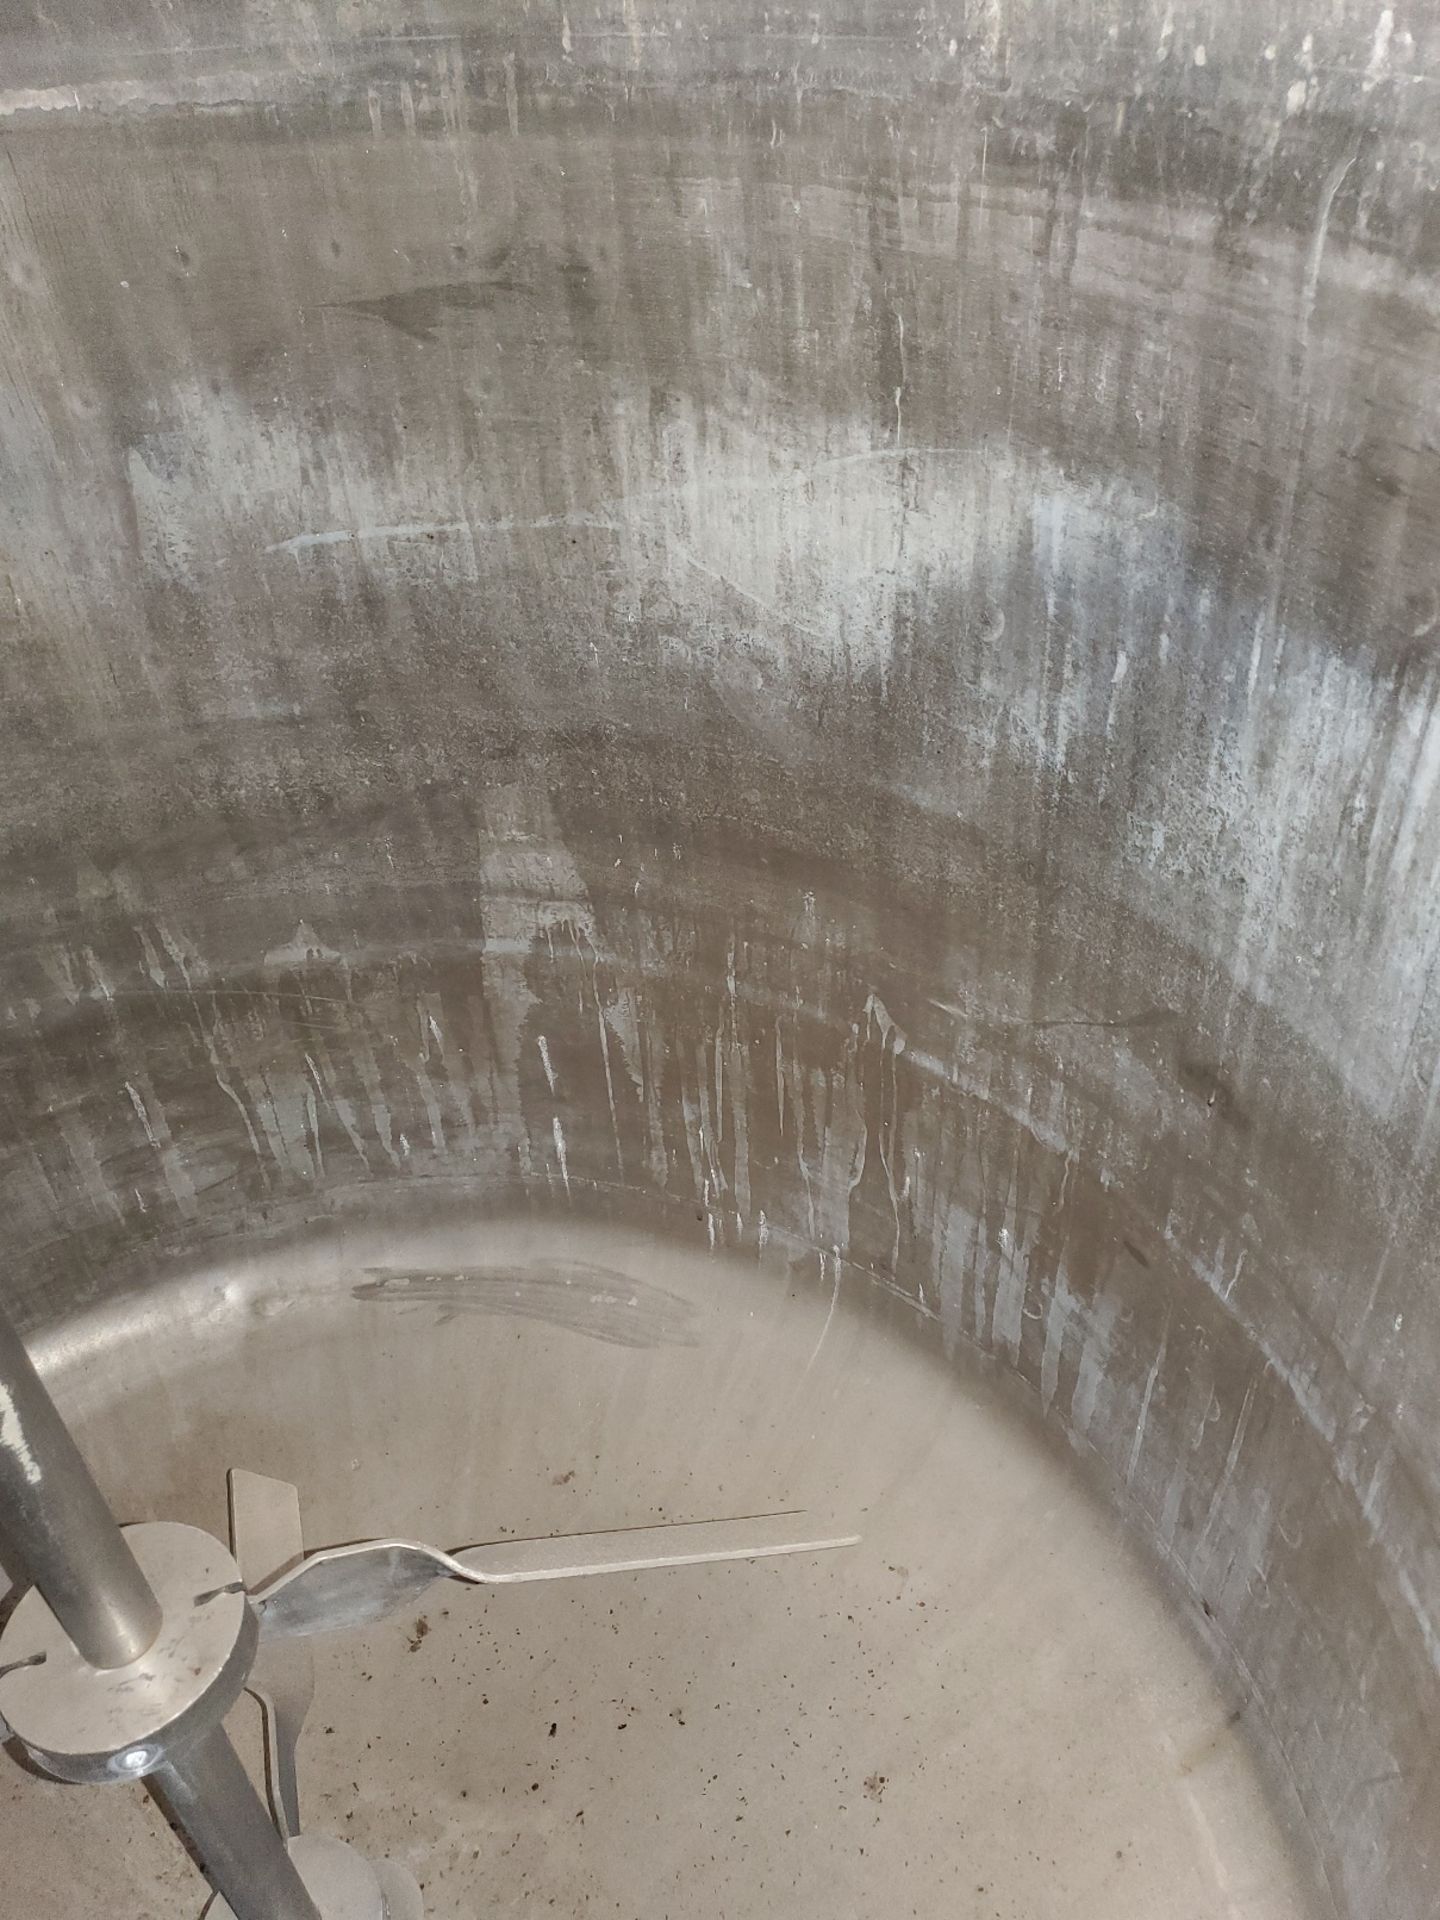 Jacketed Stainless Steel Tank, Agitated, approximately 200 Gallons - Image 10 of 11